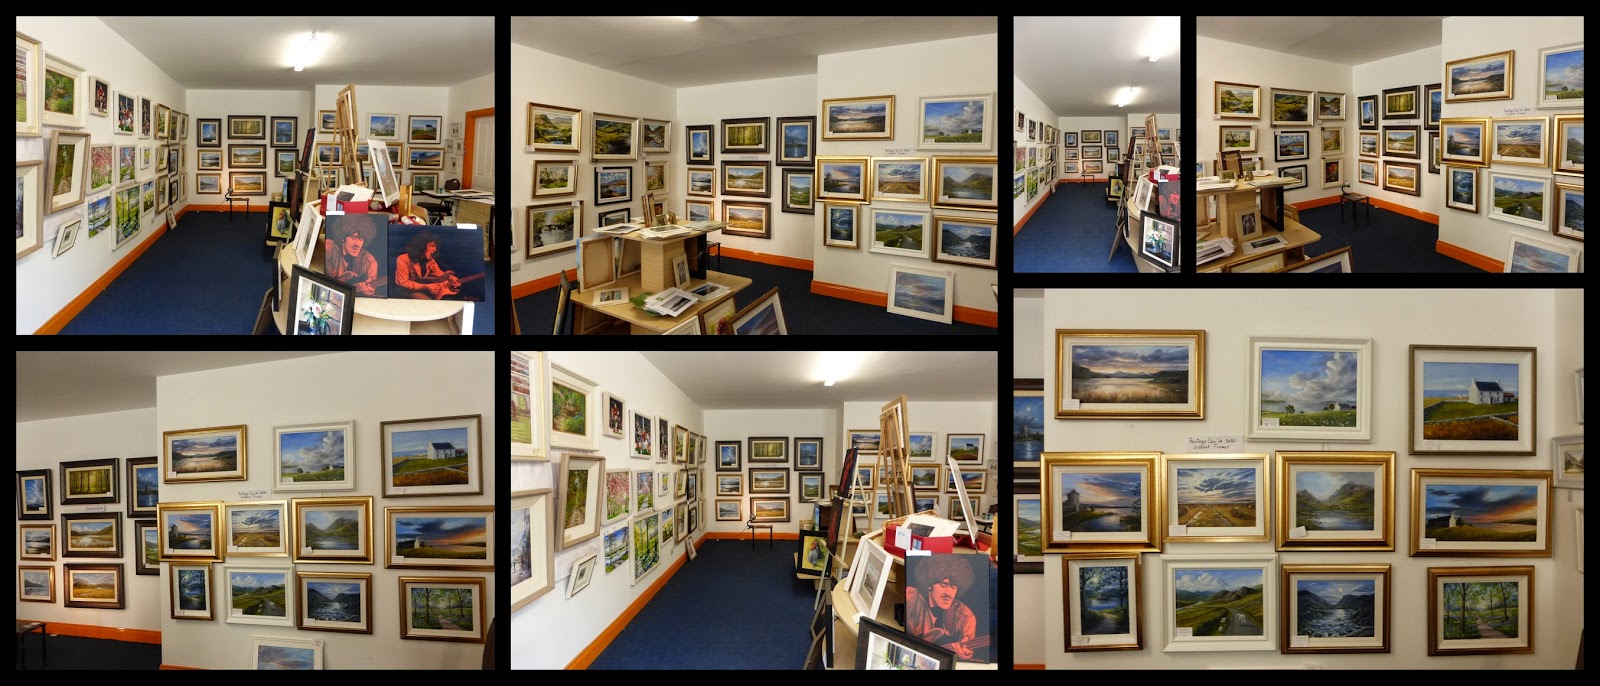 Exhibition at the Back Lane Gallery, Killarney